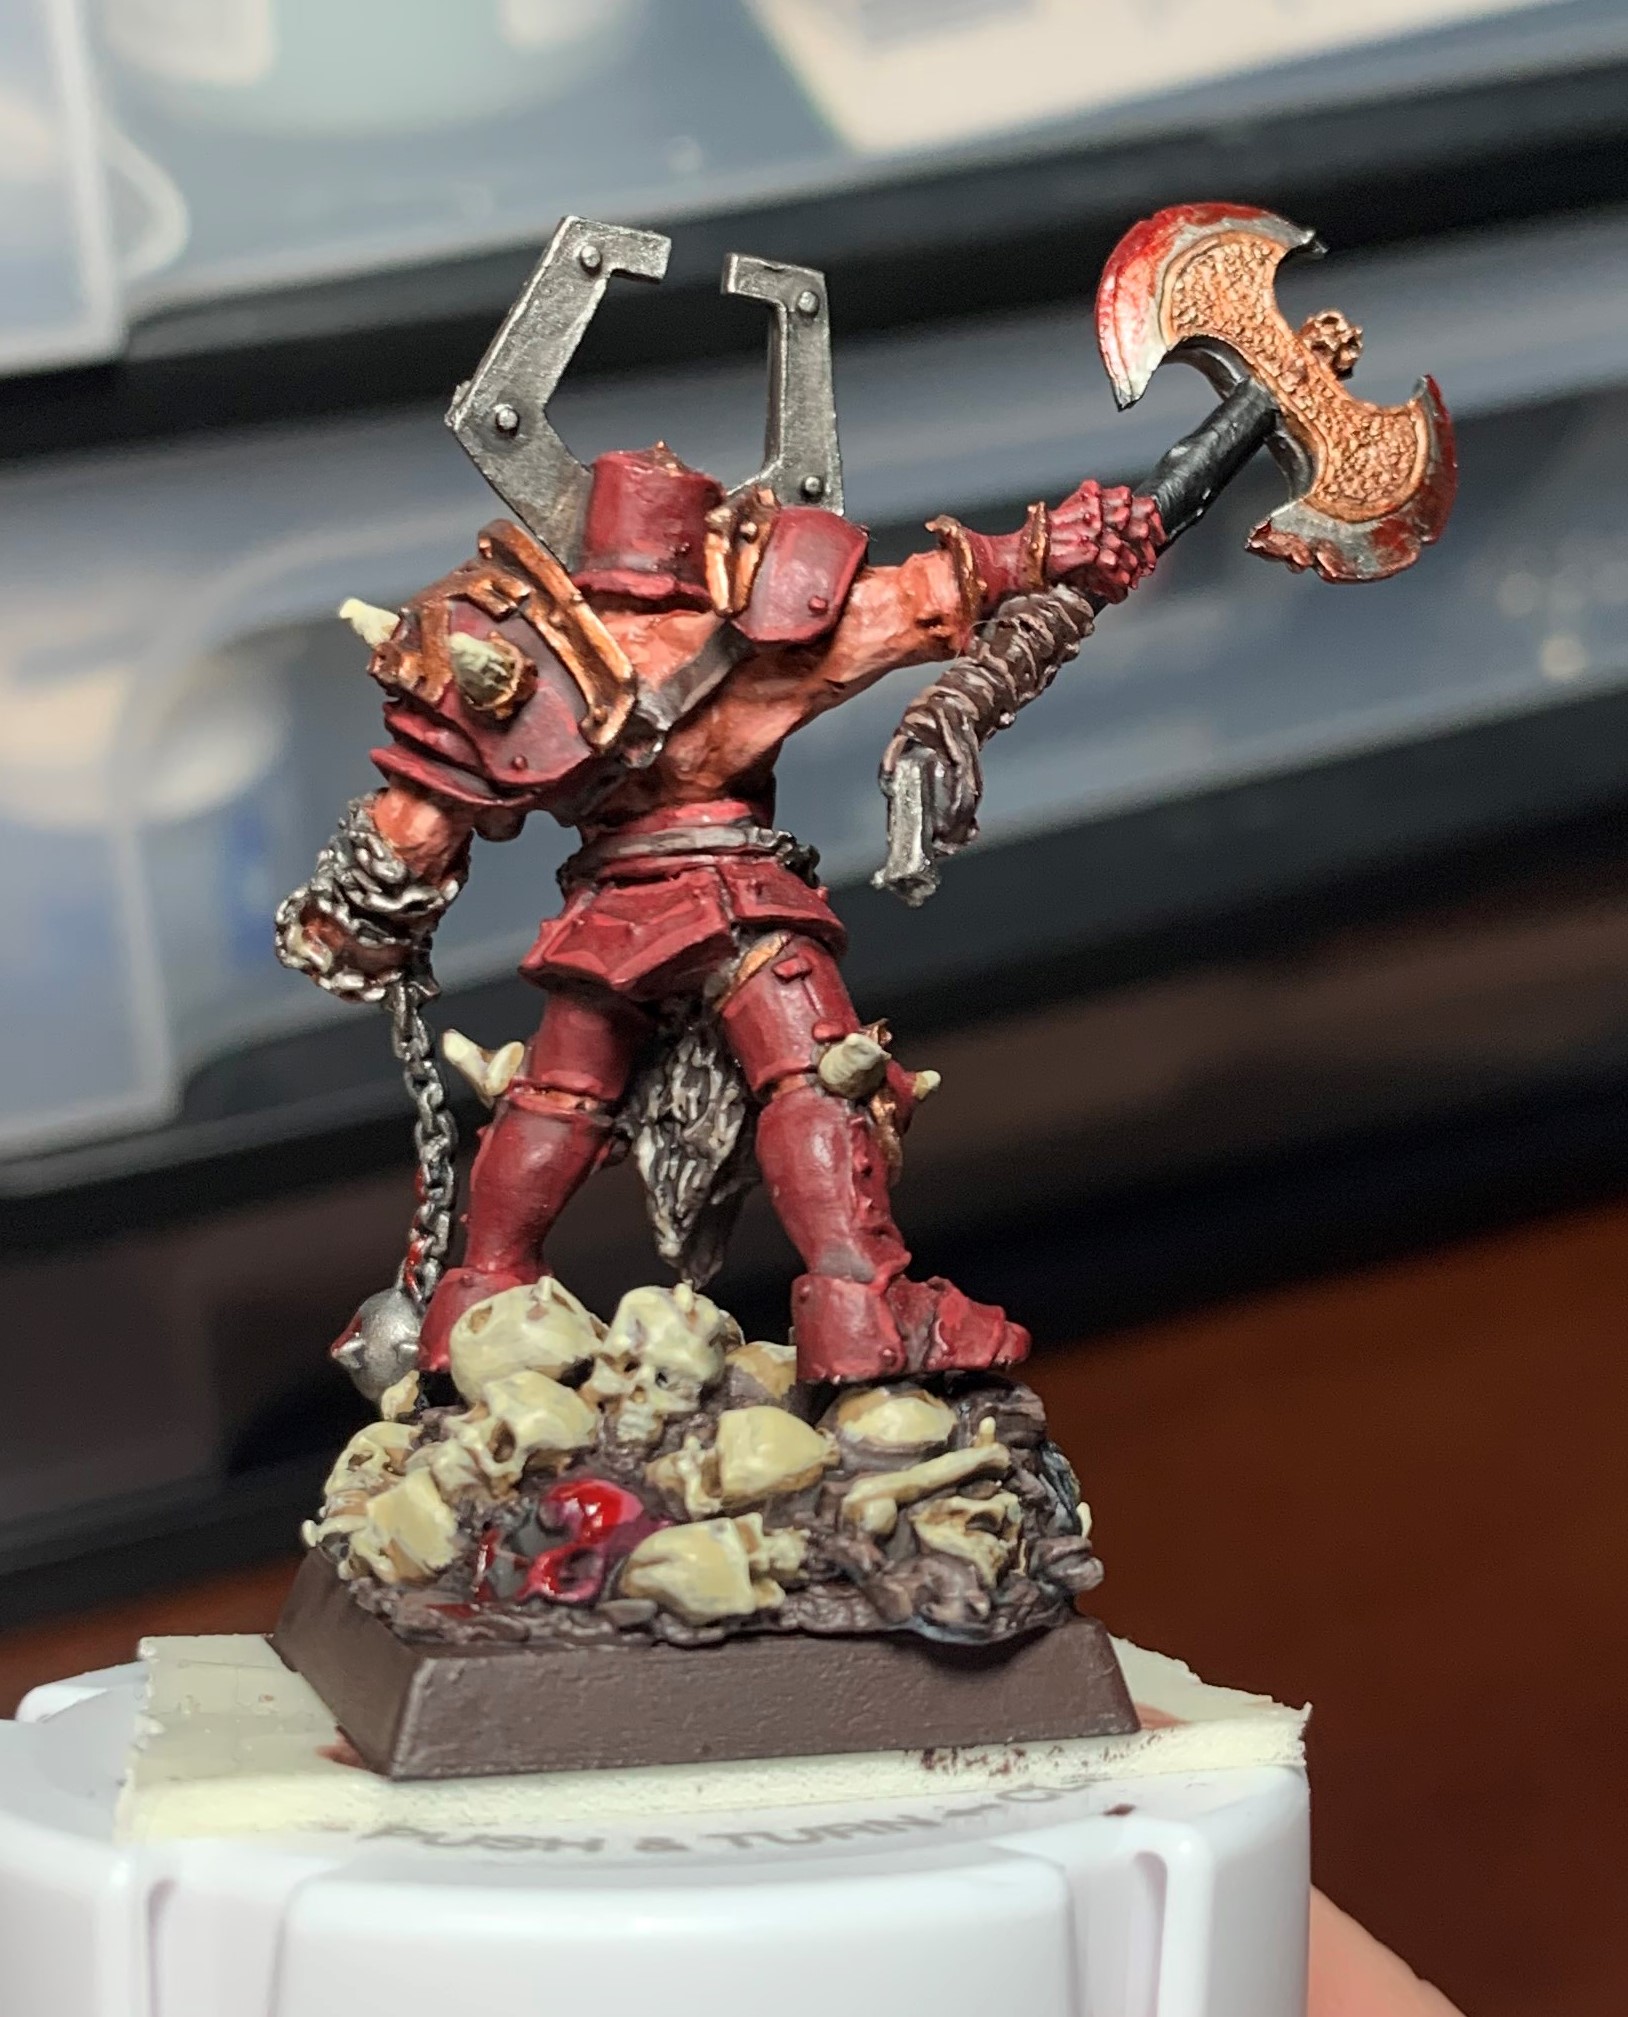 WilhelMiniatures: The Fang part 4. Blood for the Blood God!